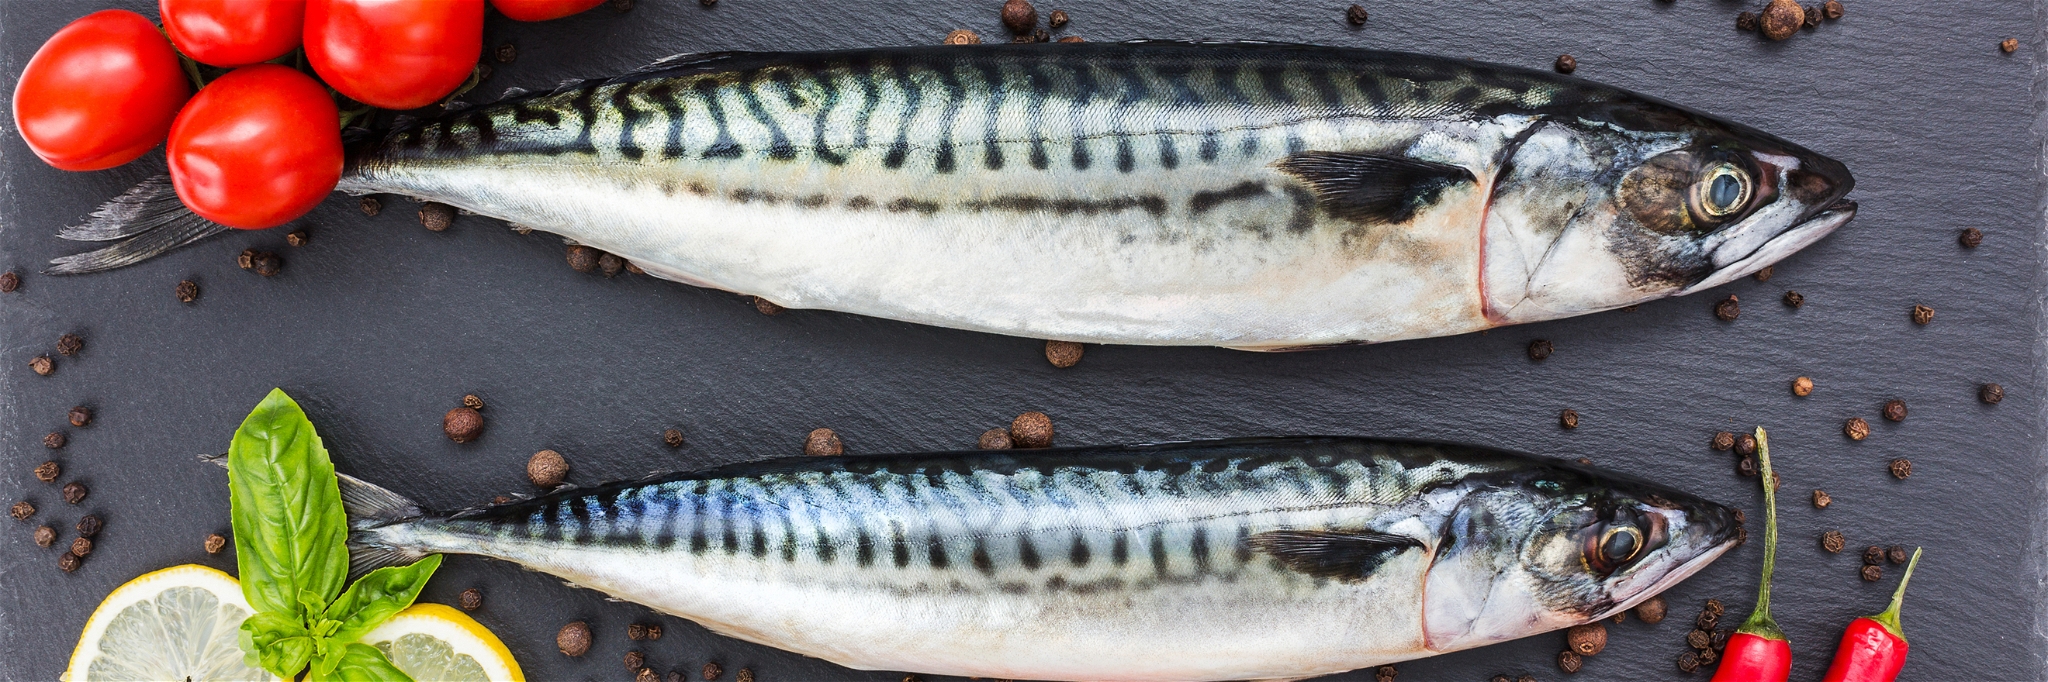 Oily fish like mackerel are good for your tastebuds and your health.